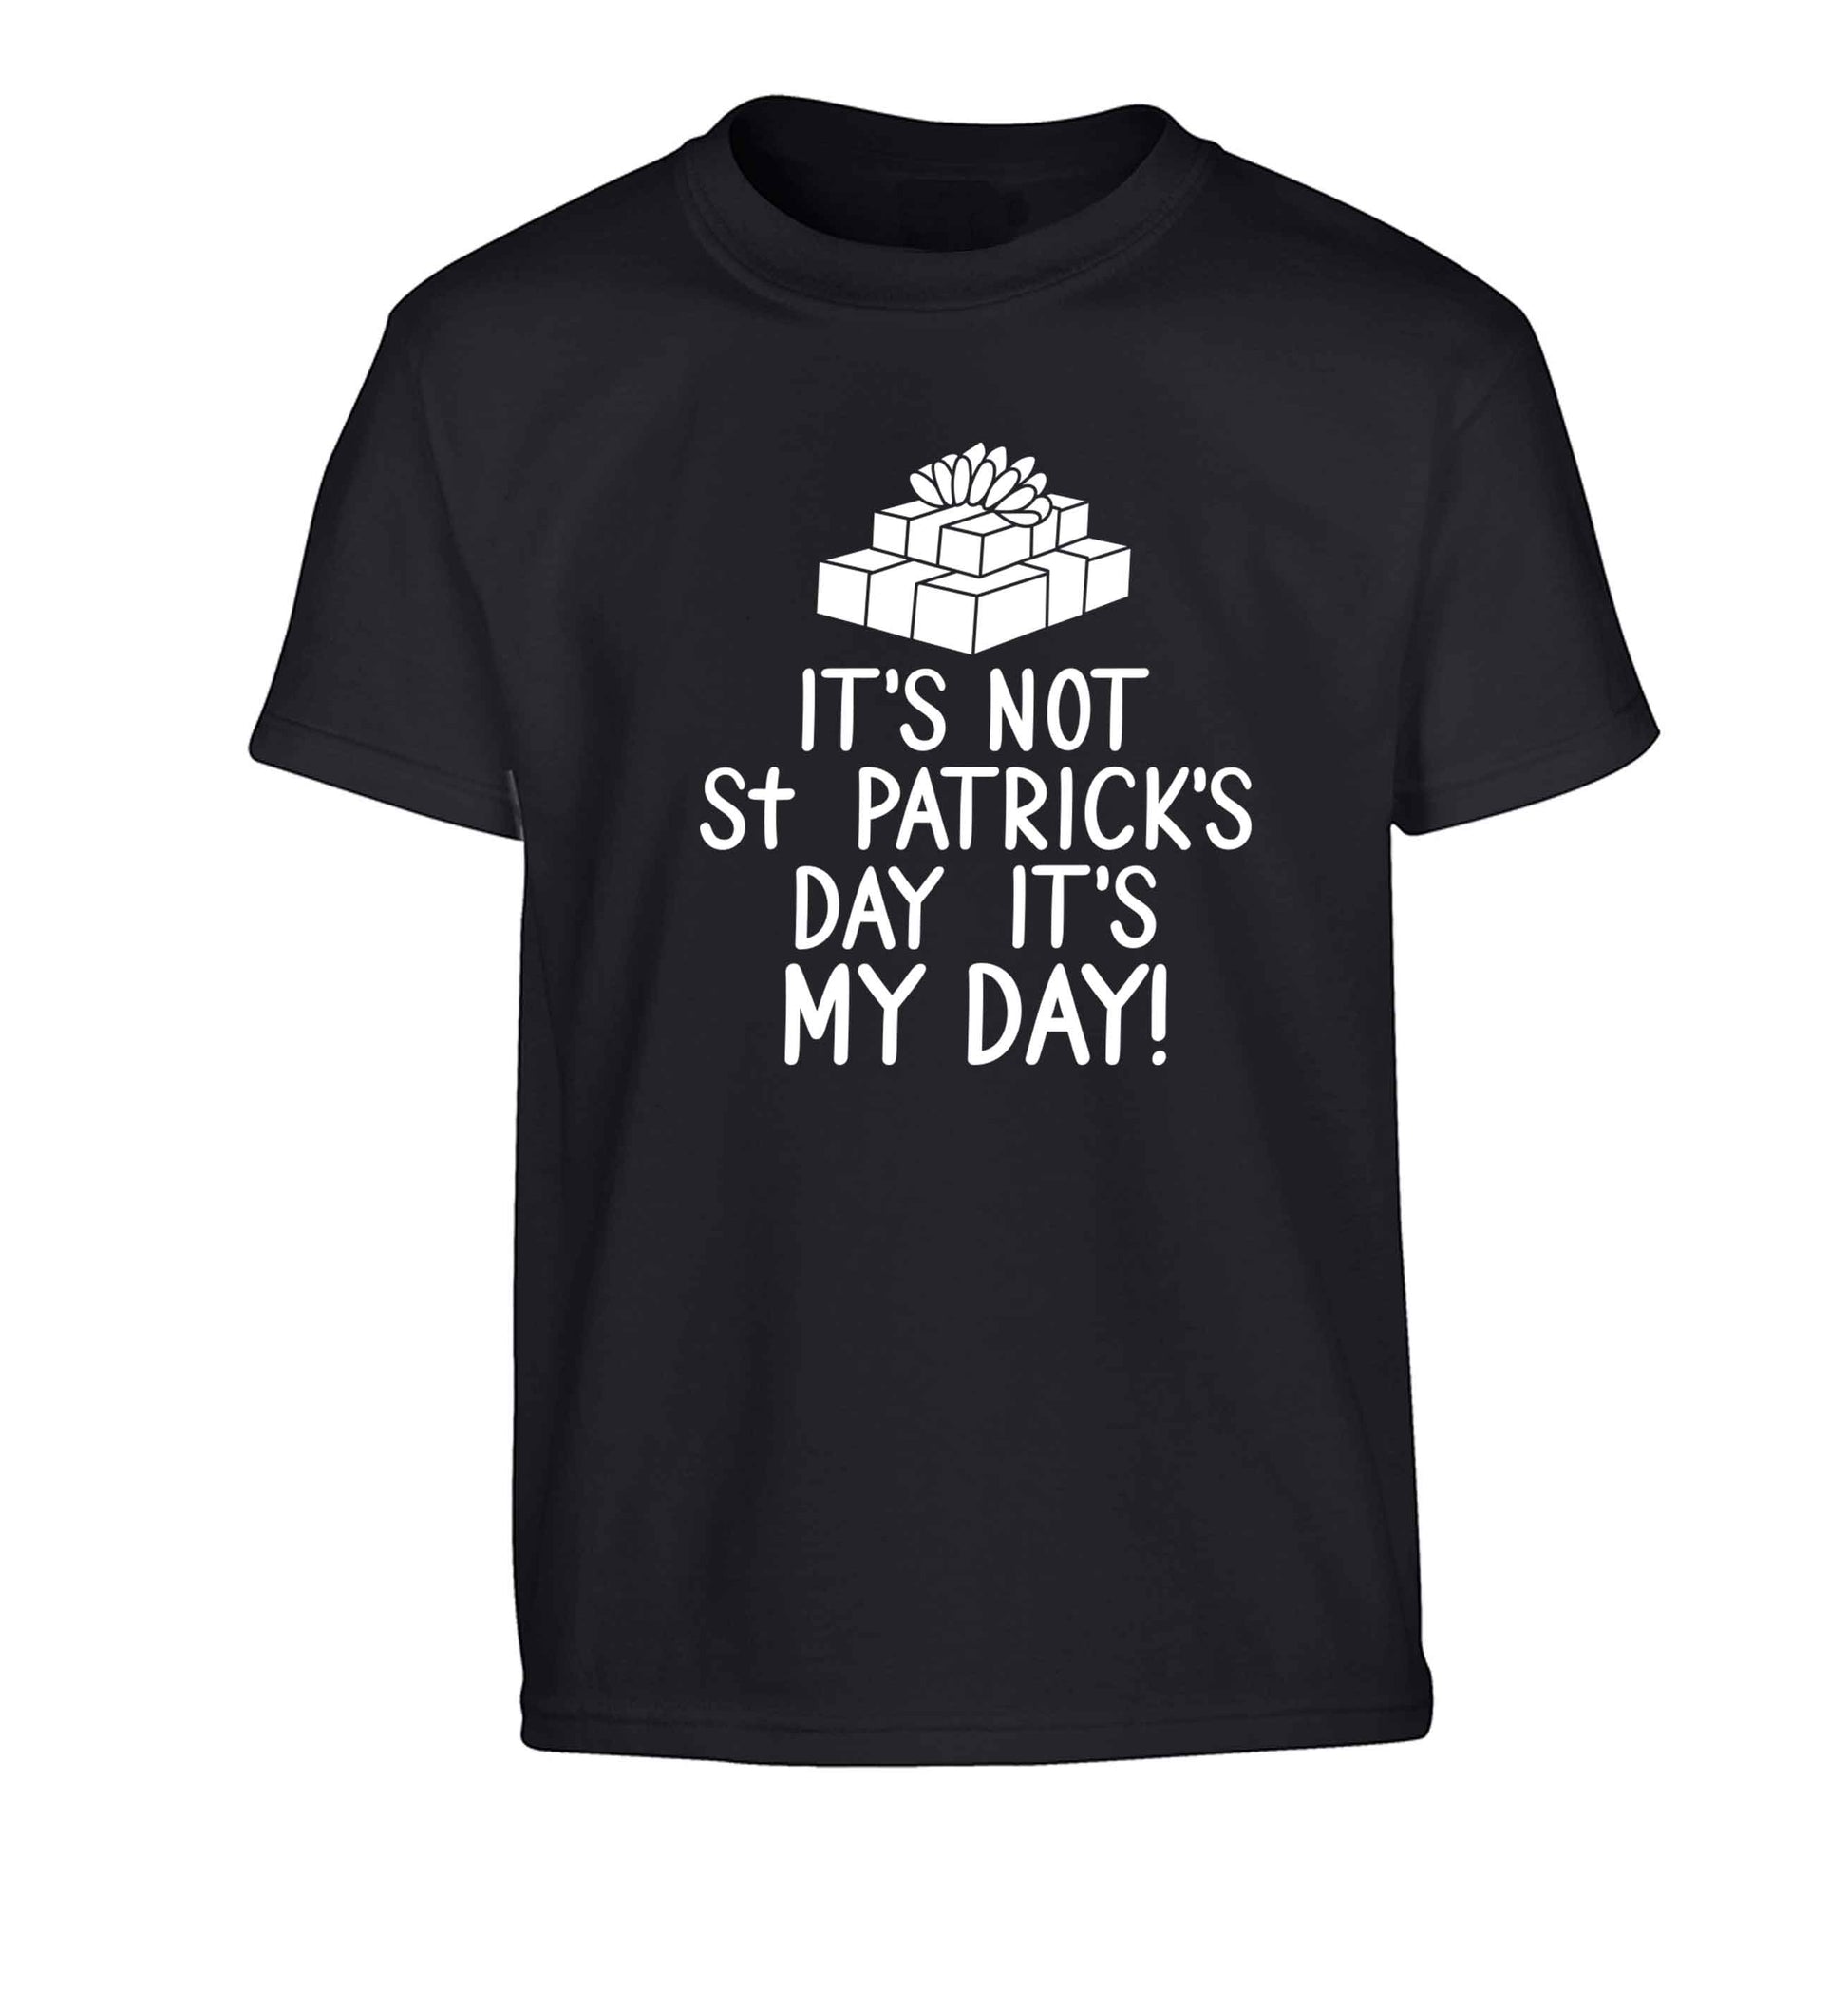 Funny gifts for your mum on mother's dayor her birthday! It's not St Patricks day it's my day Children's black Tshirt 12-13 Years